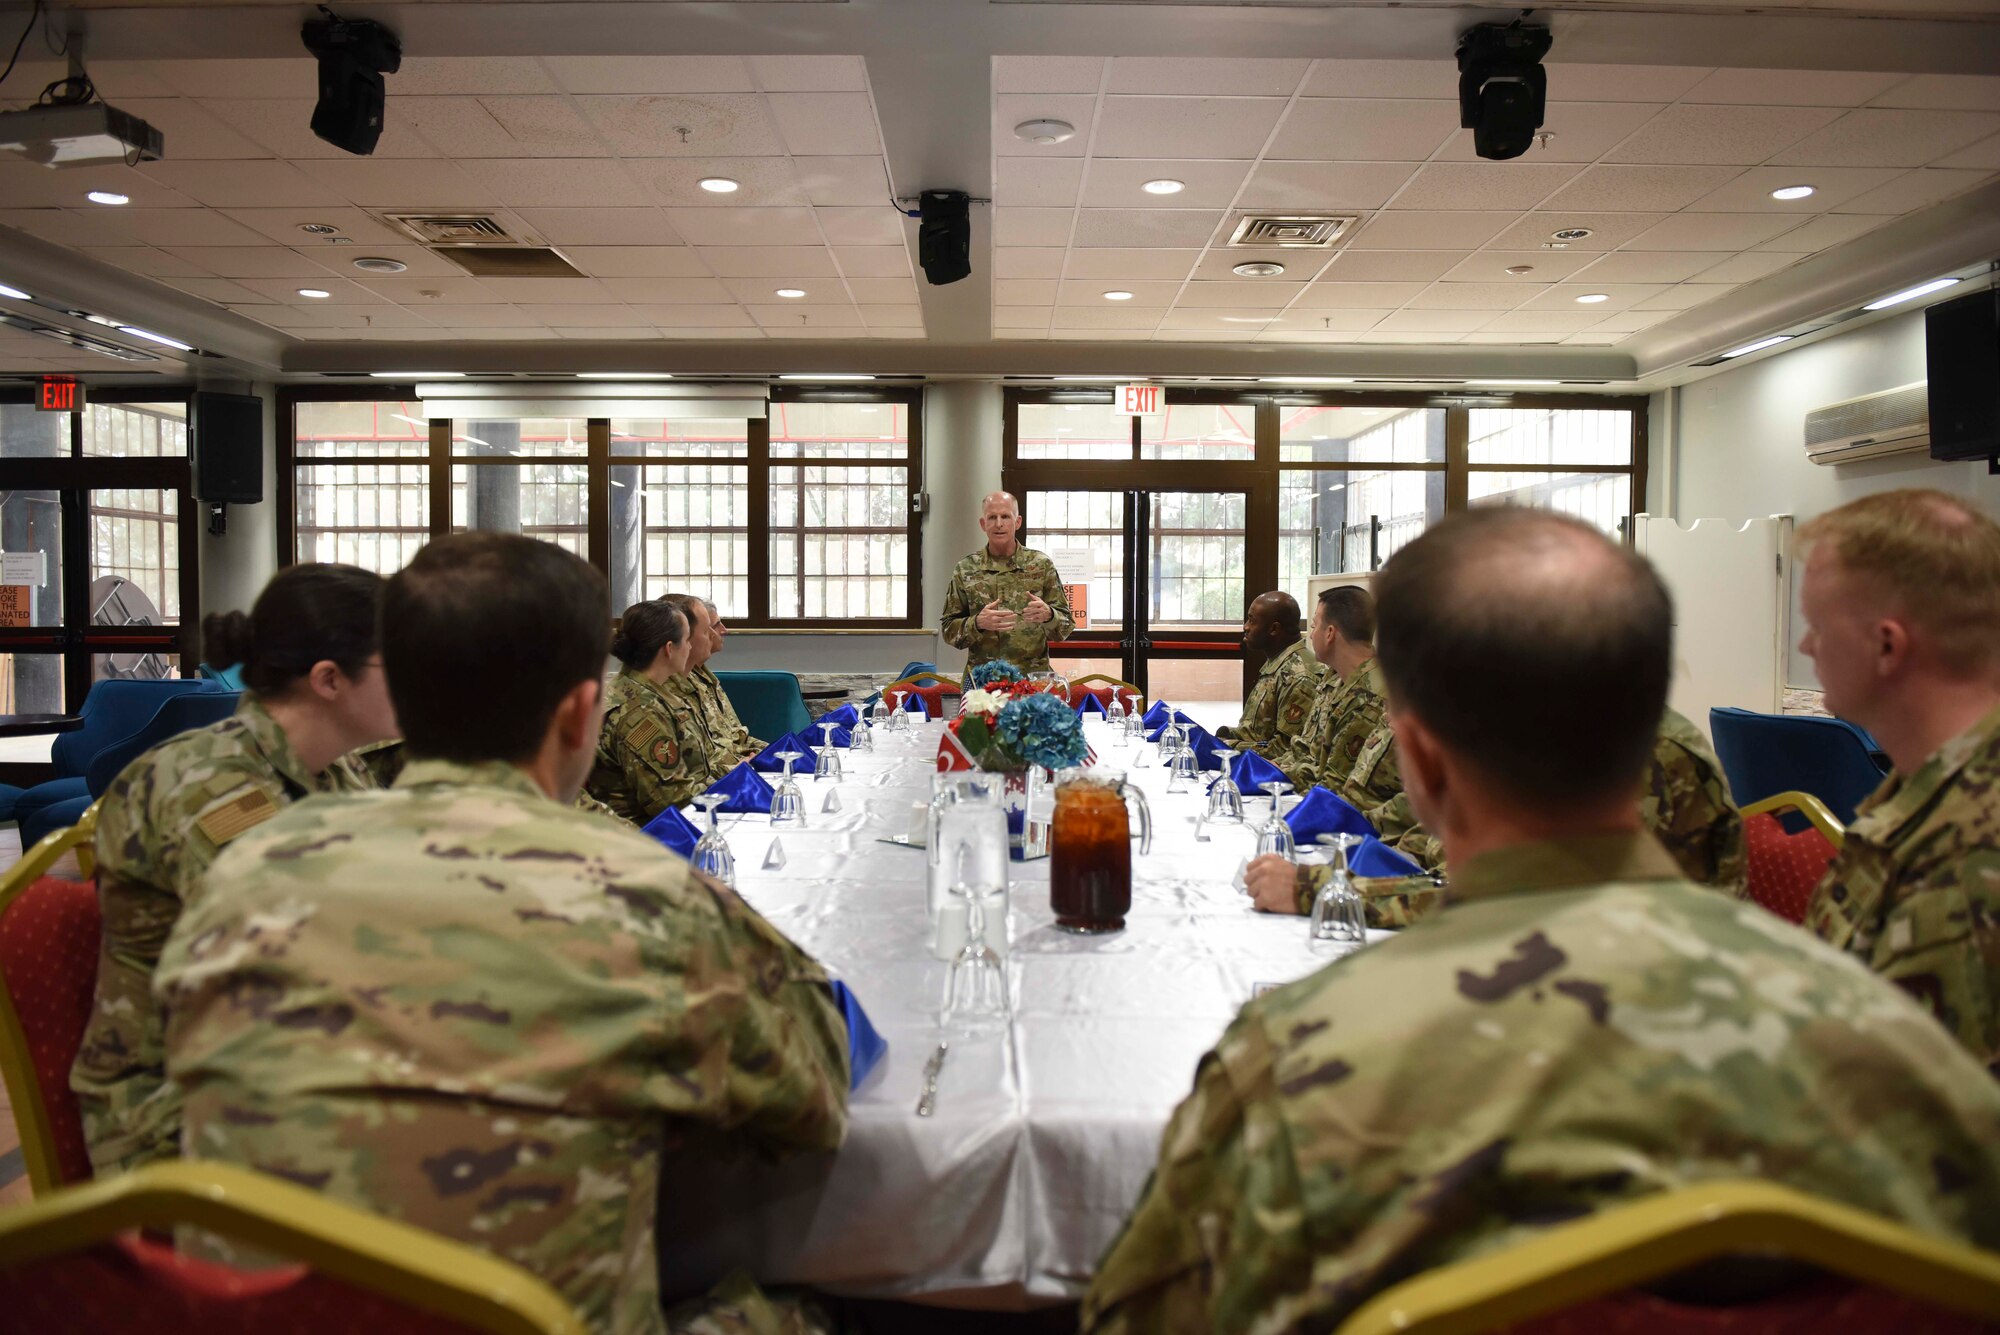 U.S. Air Force Vice Chief of Staff Stephen W. Wilson speaks during a luncheon with 39th Air Base Wing officials at Incirlik Air Base, Turkey, Sept. 29, 2019. Wilson met with the wing's leaders in order to gain insight on the mission readiness of U.S. Forces in the area of responsibility. (U.S. Air Force photo by Staff Sgt. Joshua Magbanua)